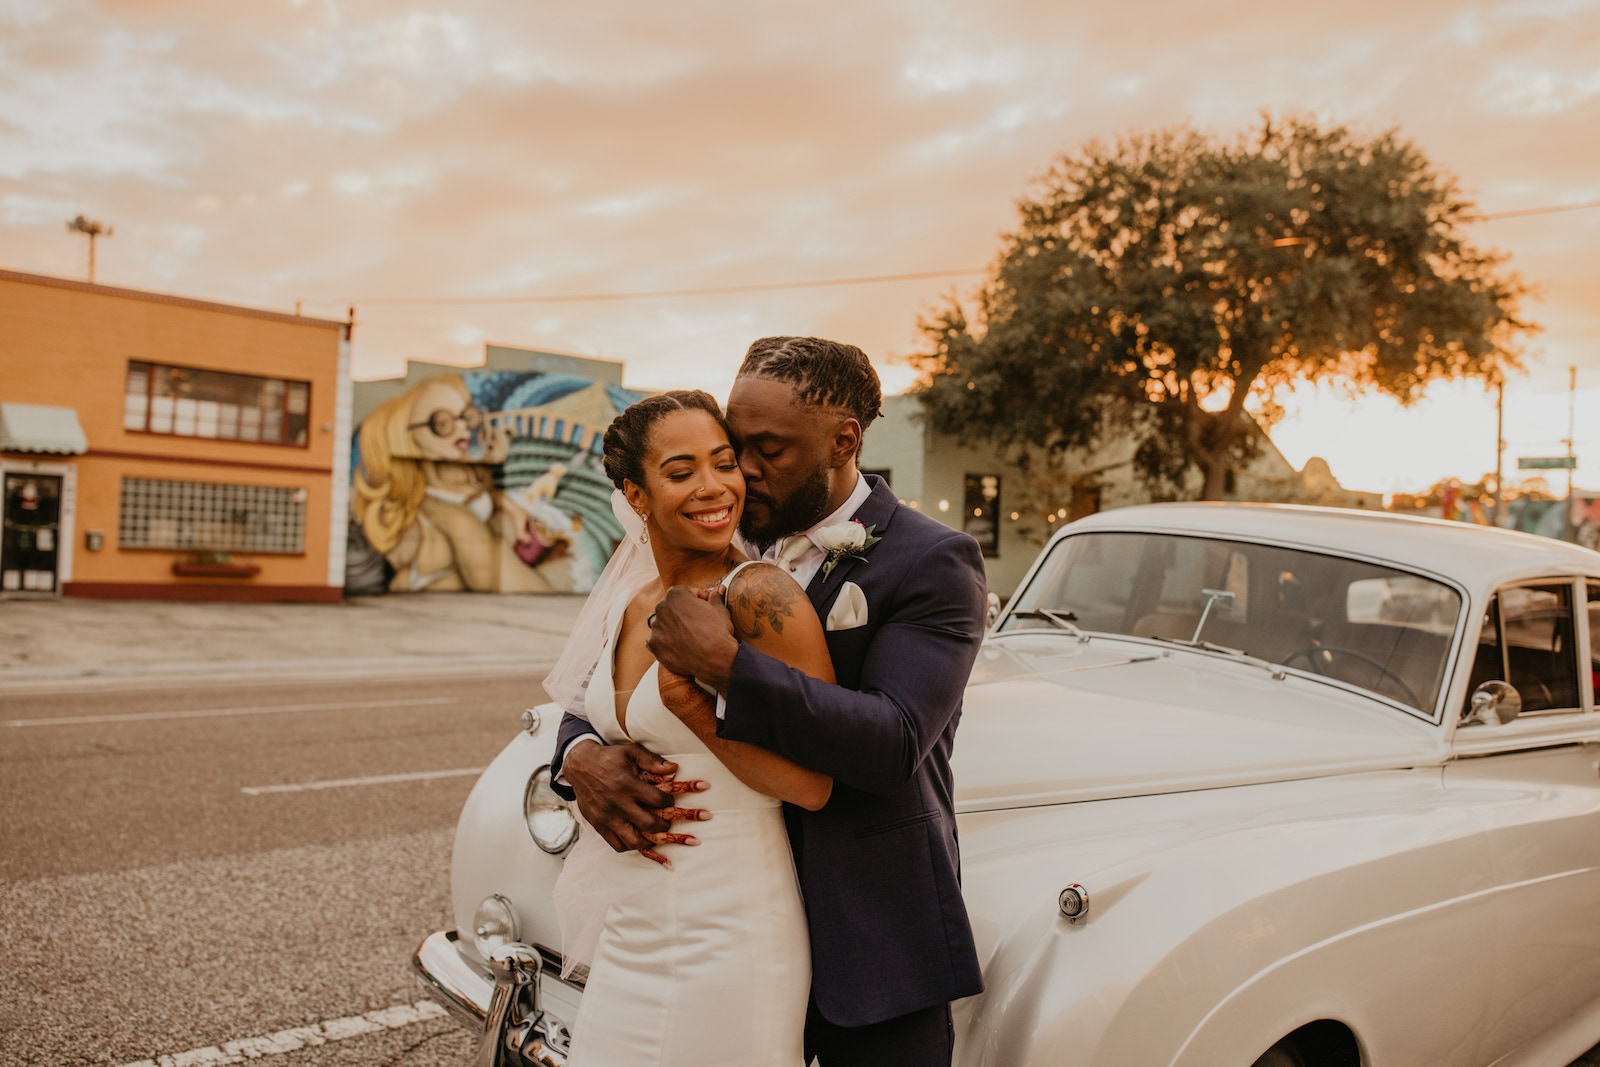 Intimate Elopement Wedding, Bride and Groom Standing Outside Vintage White Get Away Car